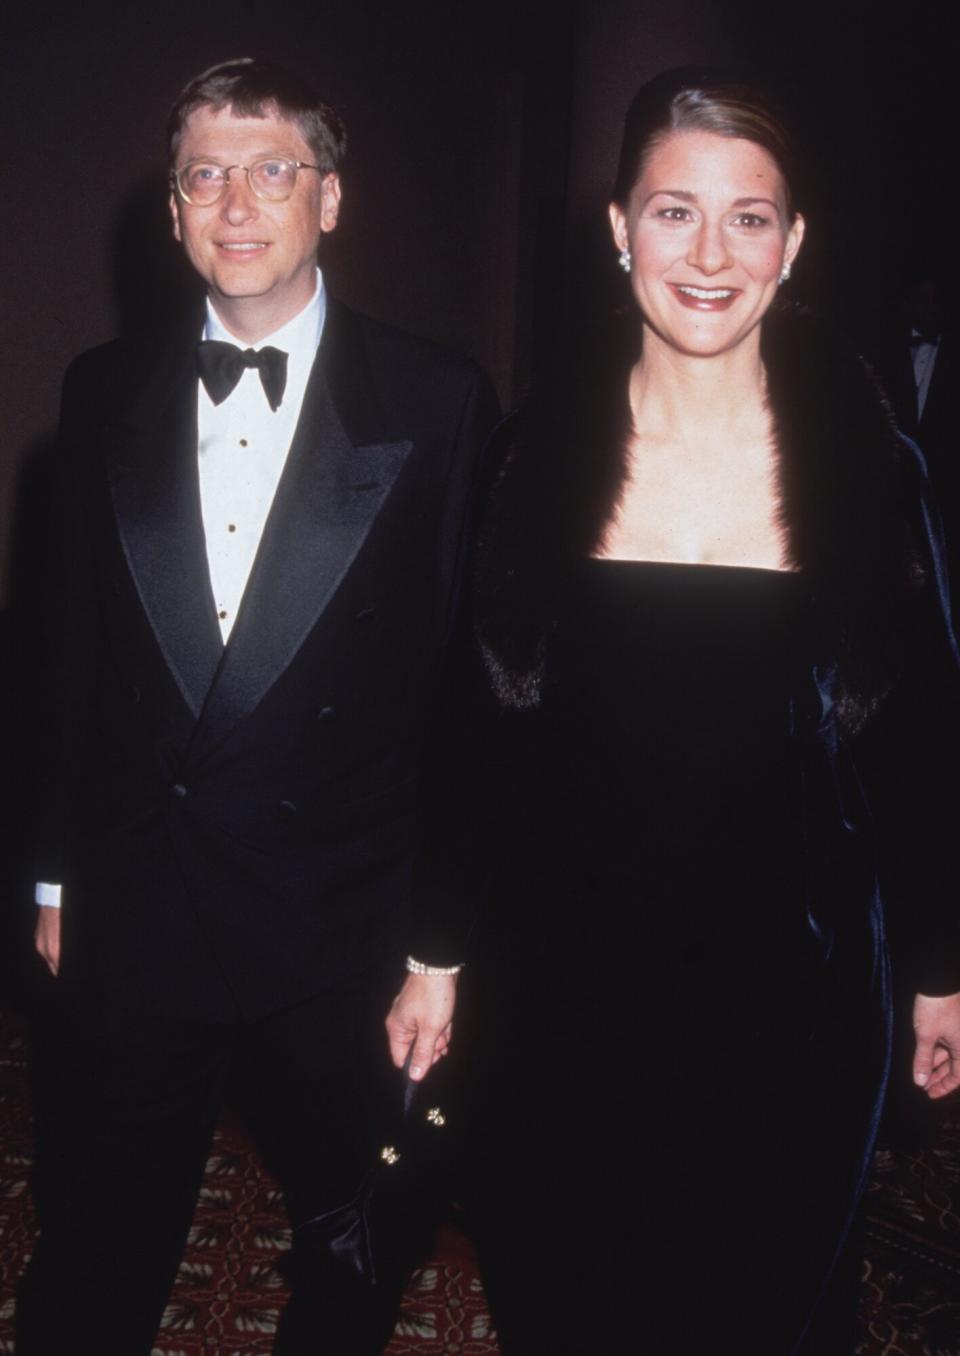 Bill Gates and his wife Melinda stand together, wearing formal attire, New York City